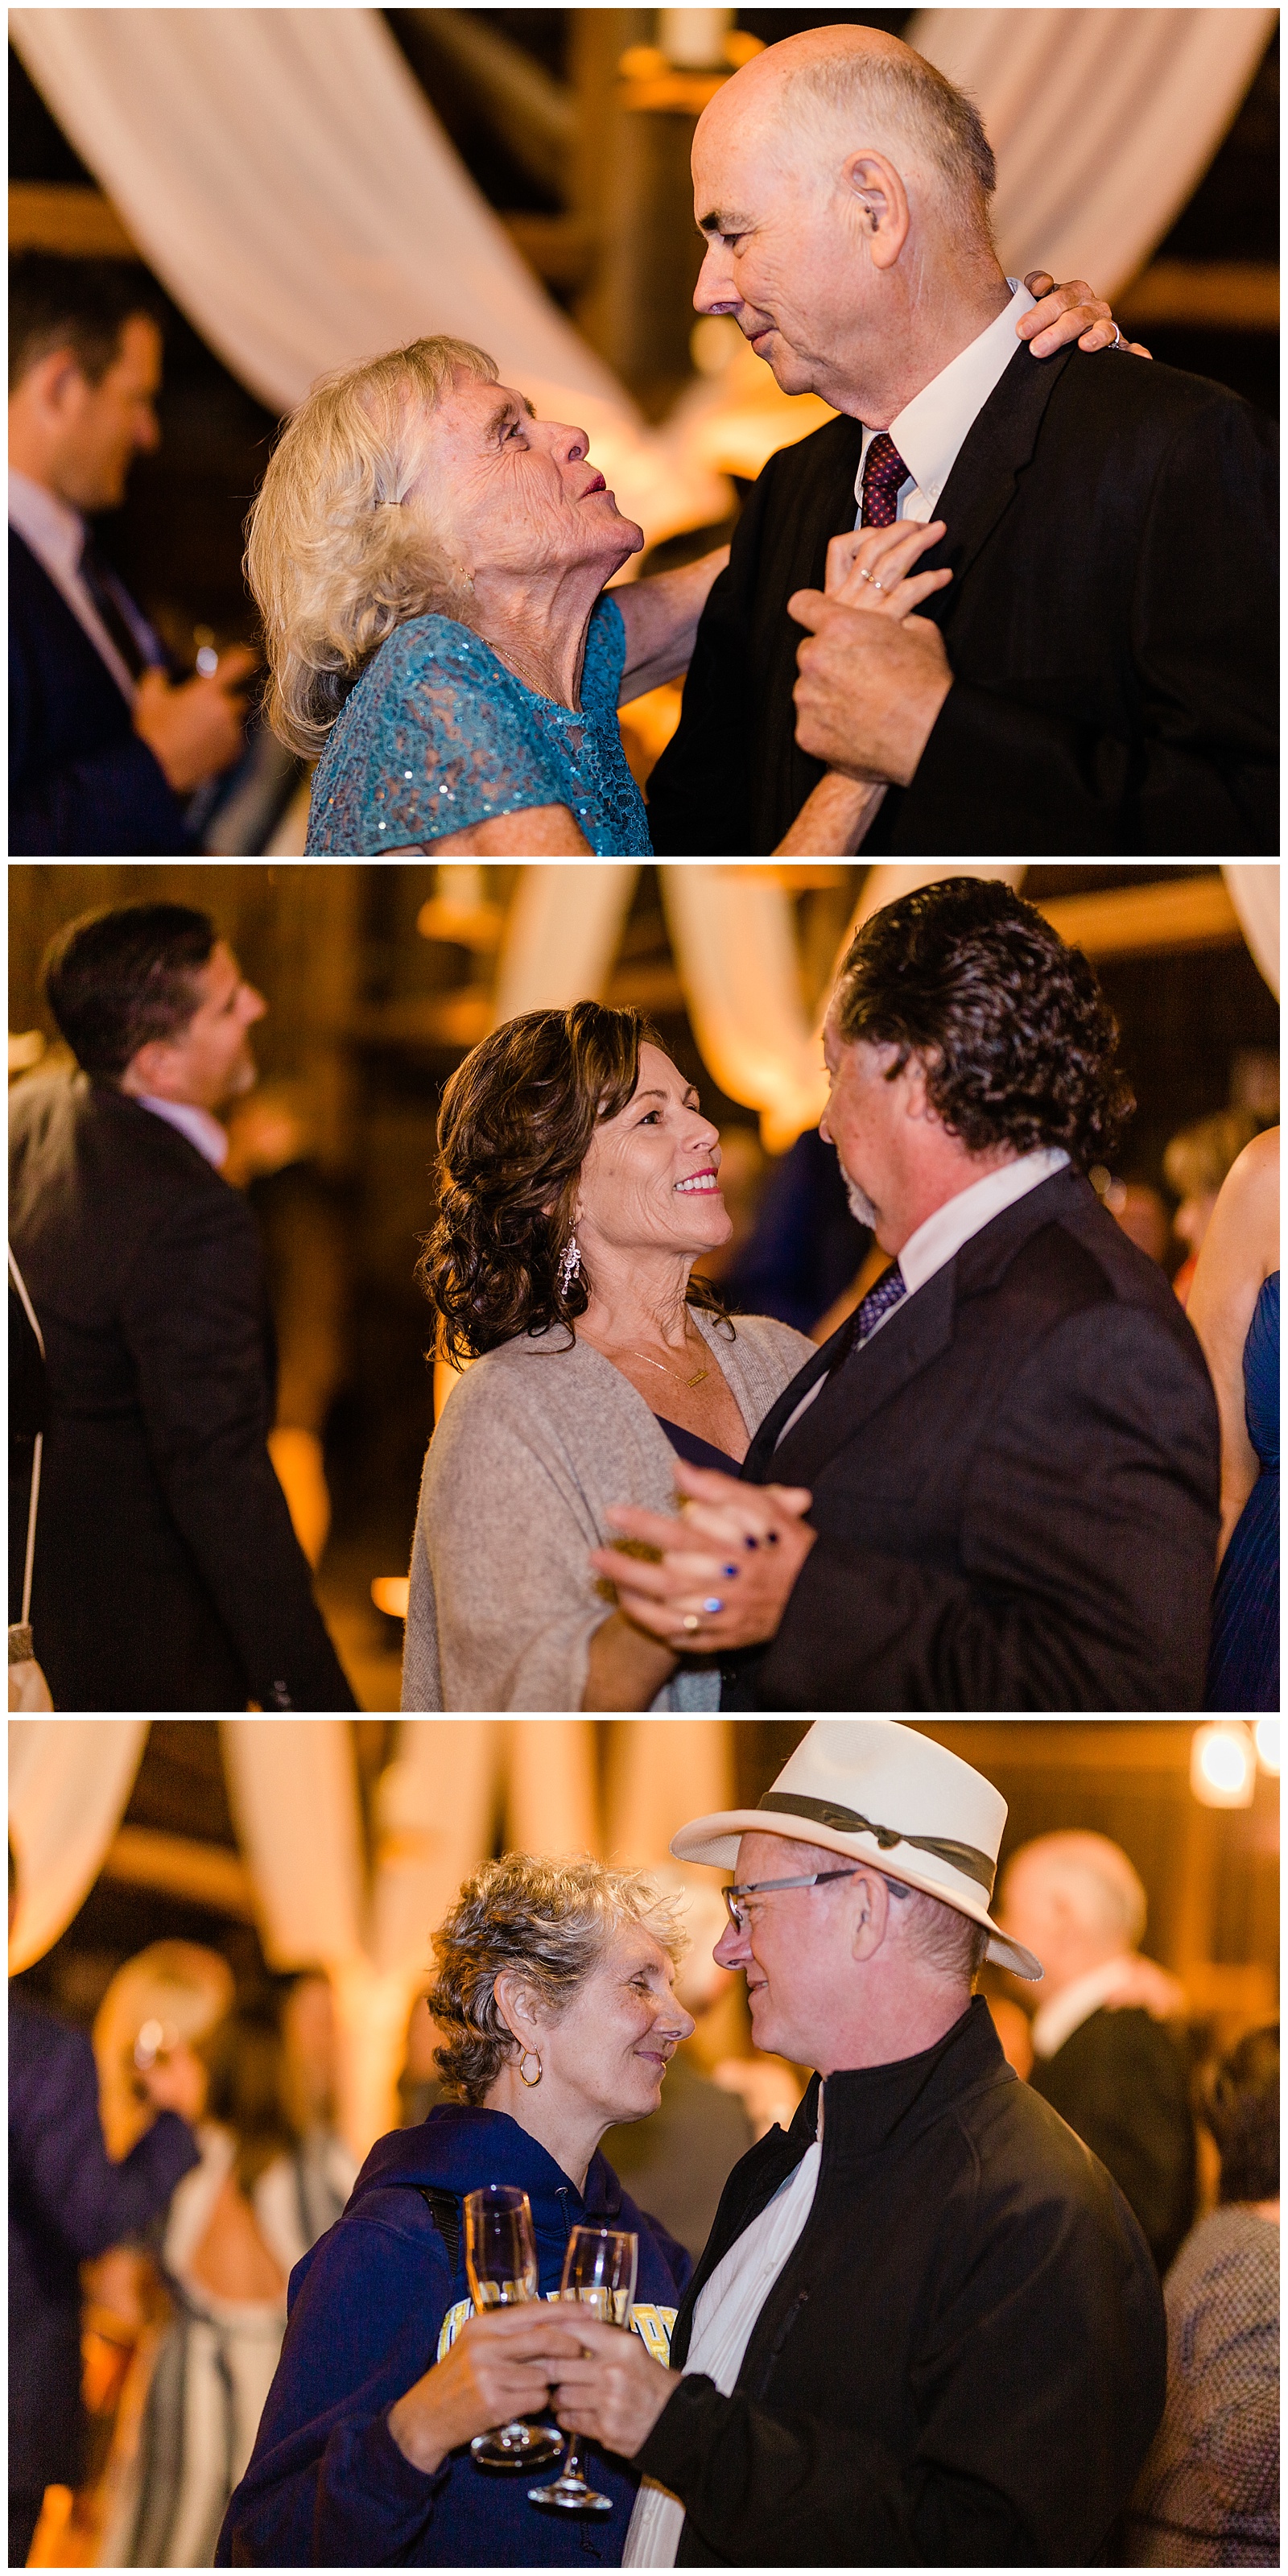 sweet couples dancing during the anniversary dance at a wedding reception